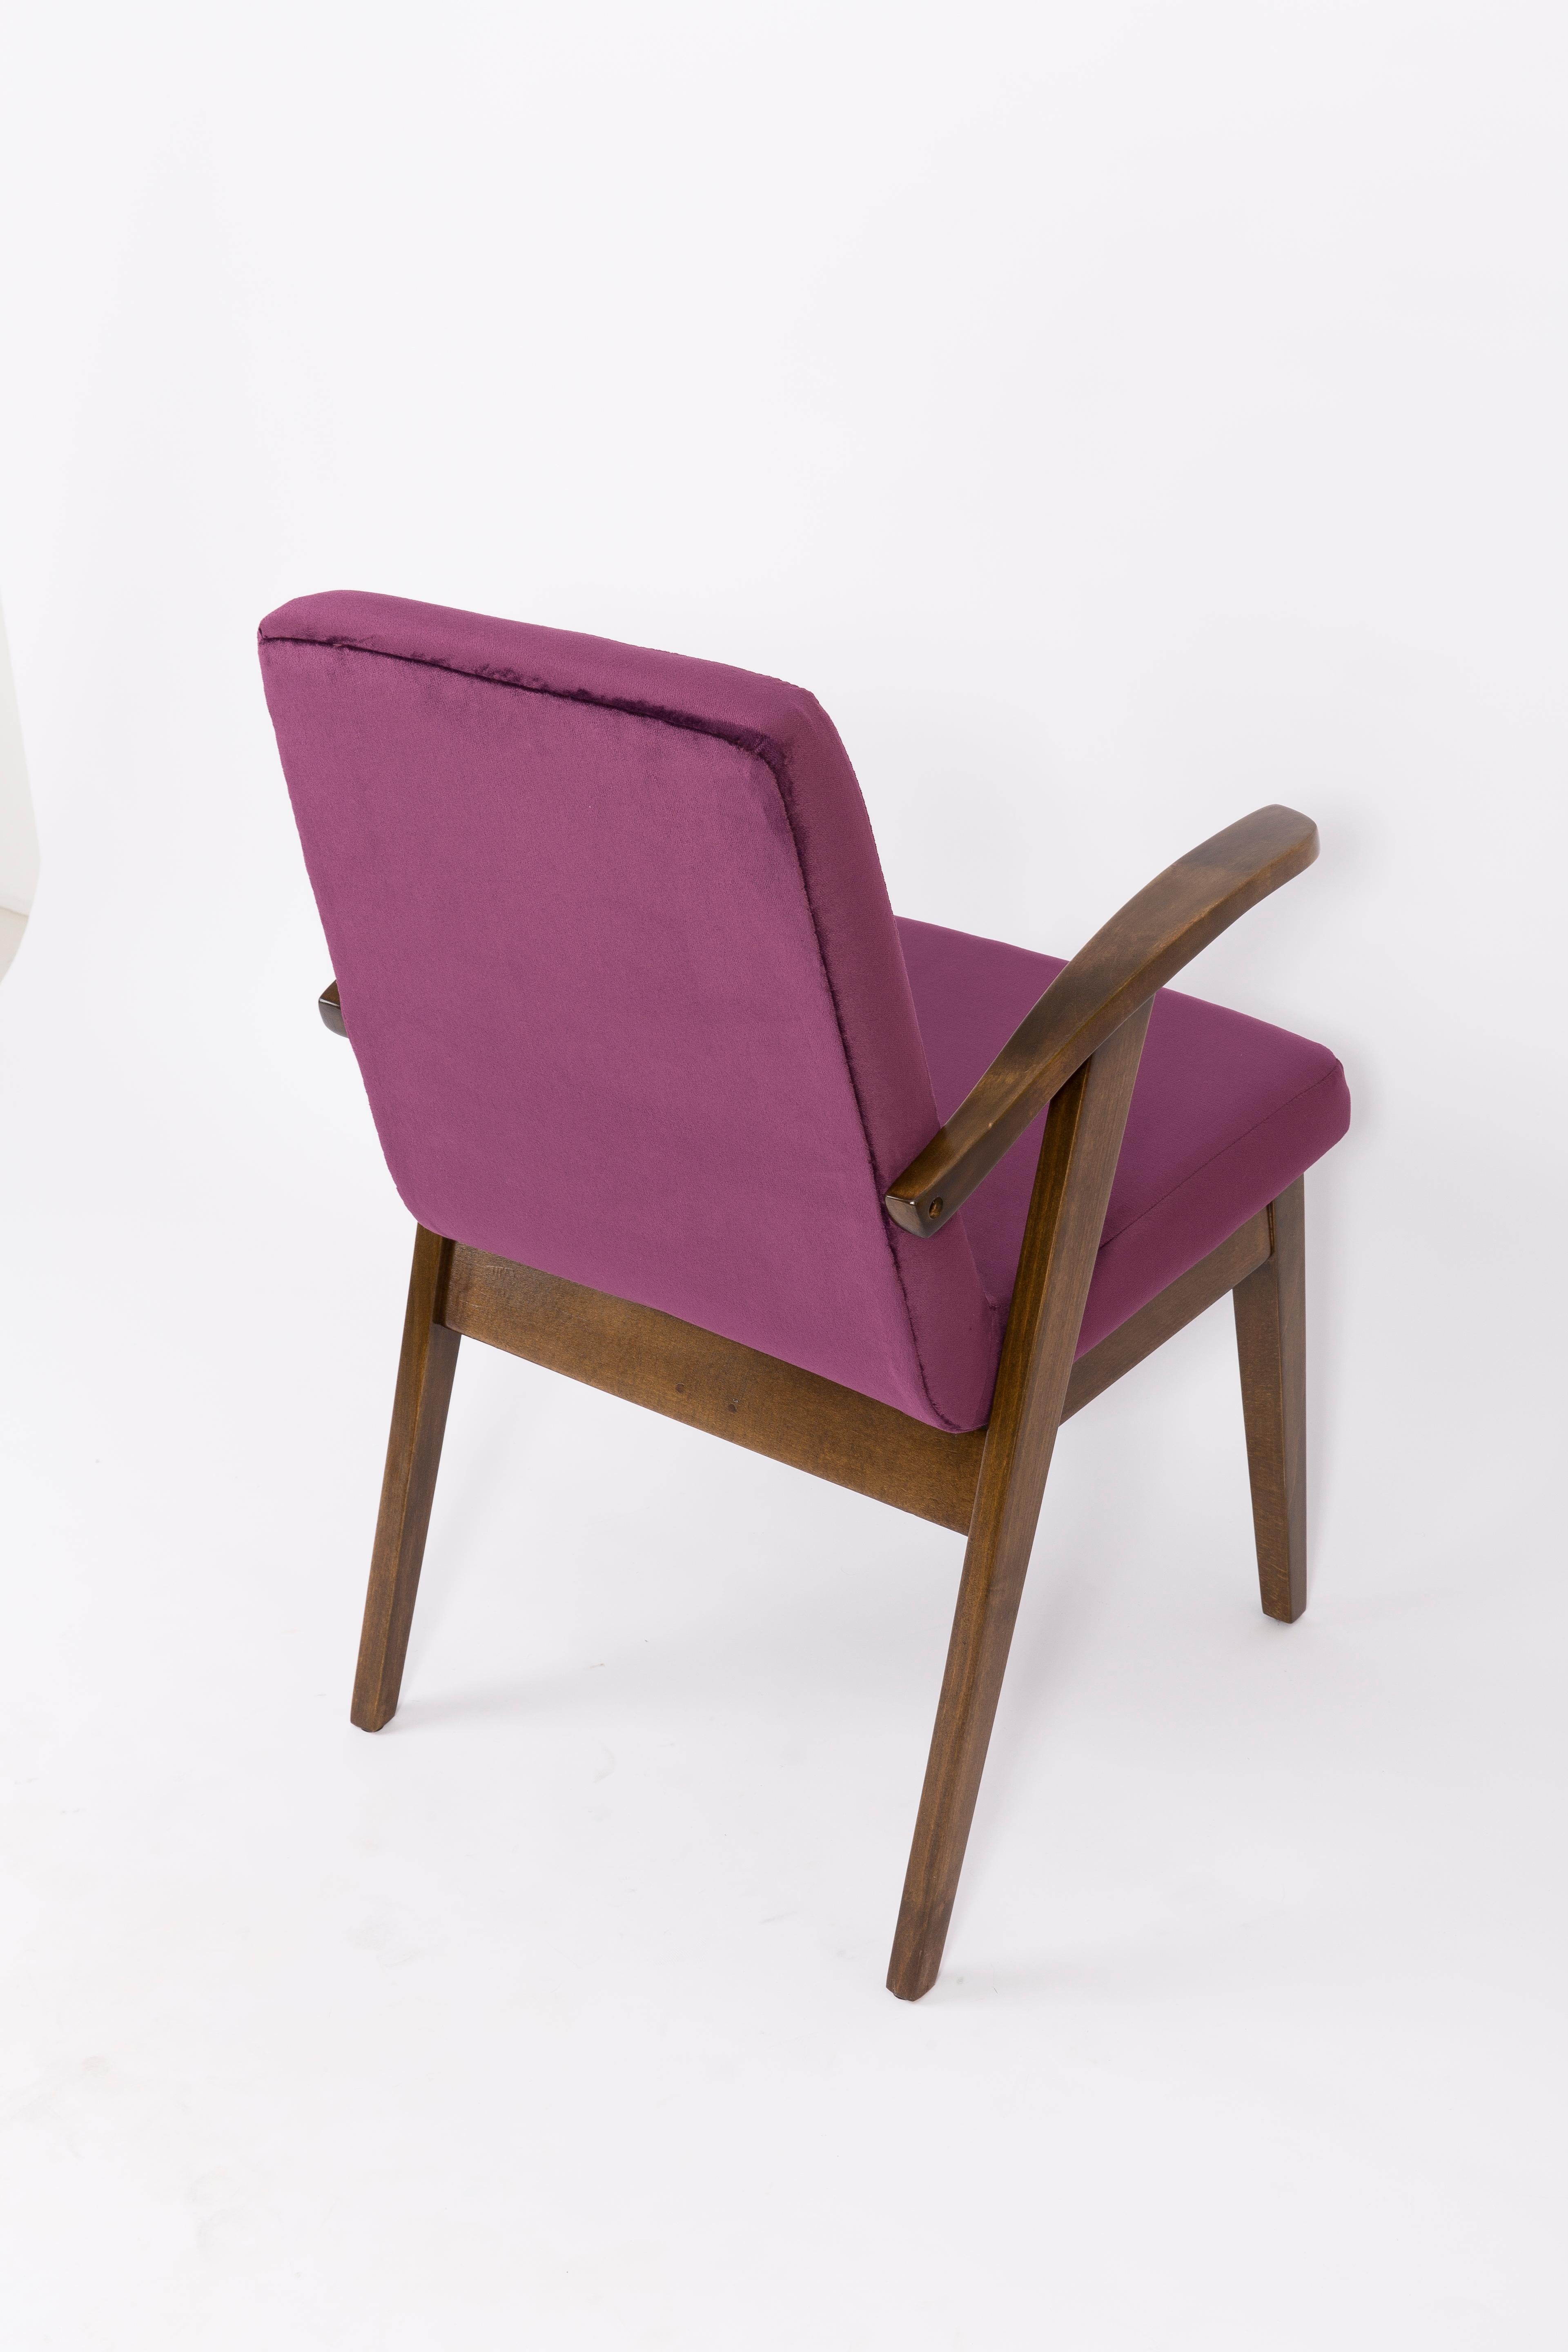 Textile Set of Two 20th Century Vintage Plum Violet Armchair by Mieczyslaw Puchala 1960s For Sale